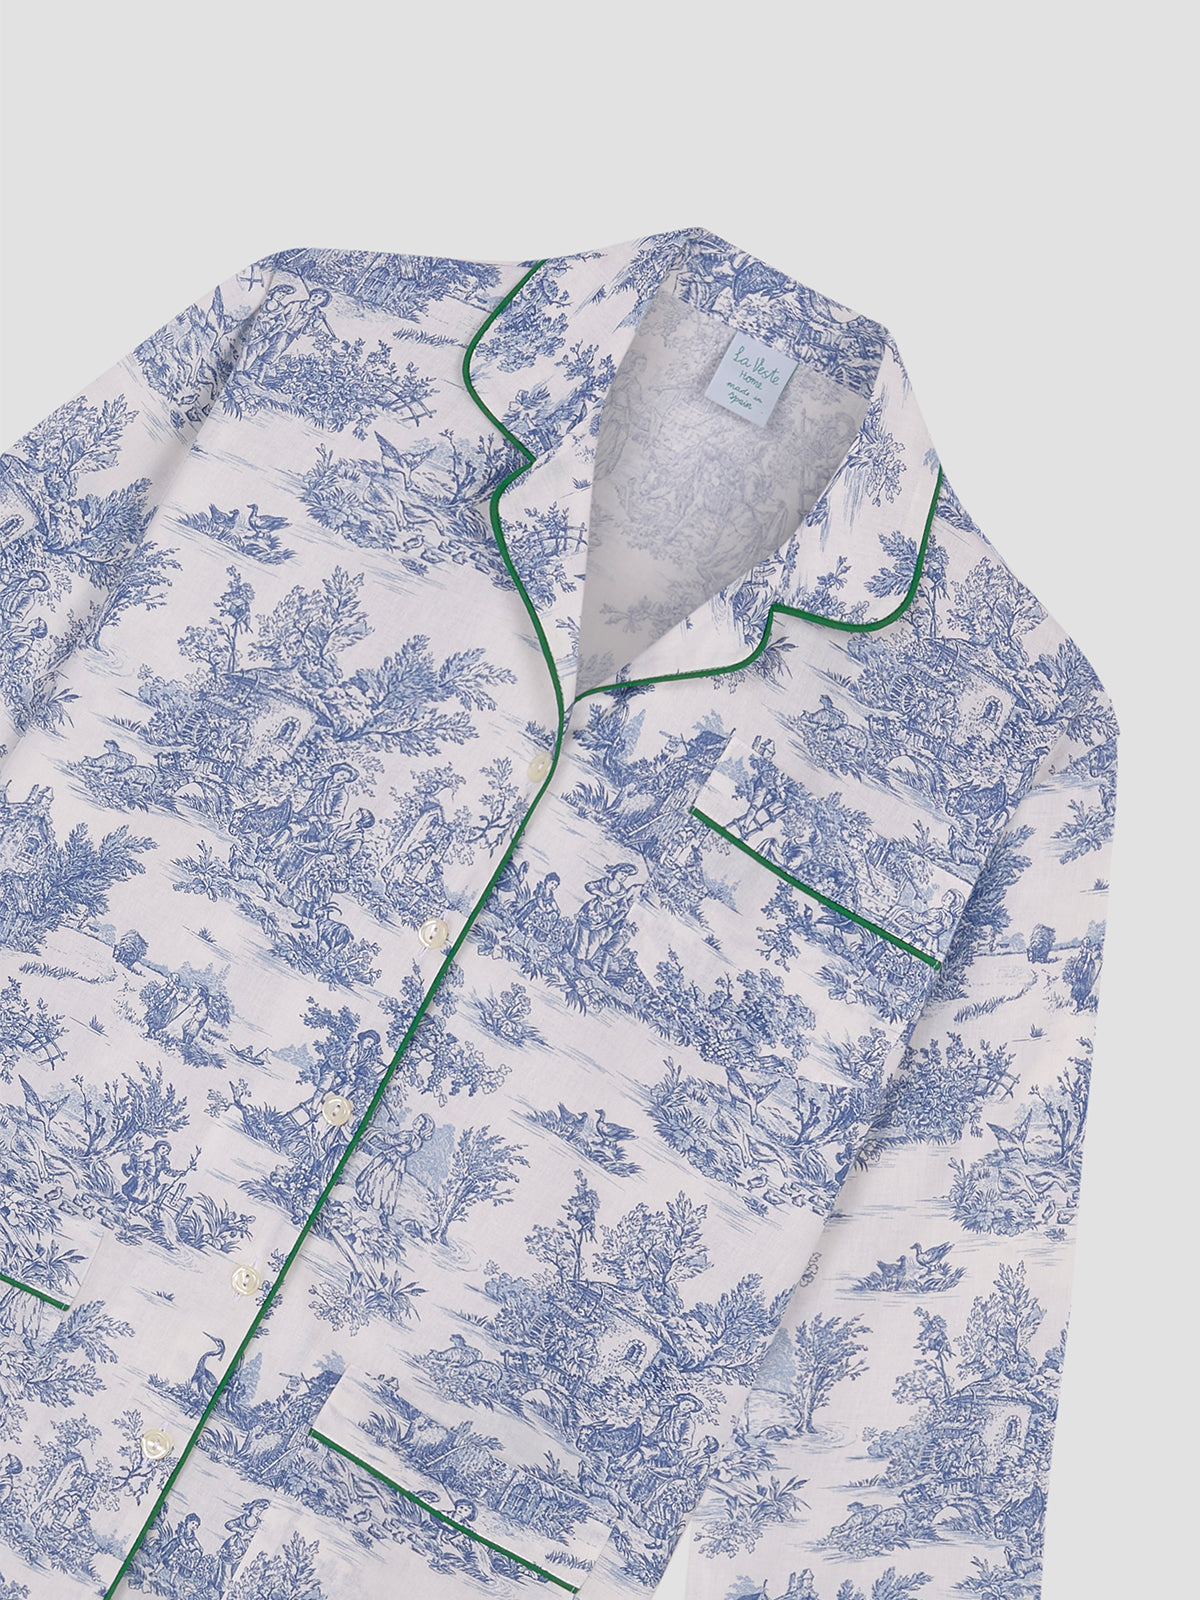 Pajama shirt with three front pockets, green bias details and Blue Toile de Jouy print.